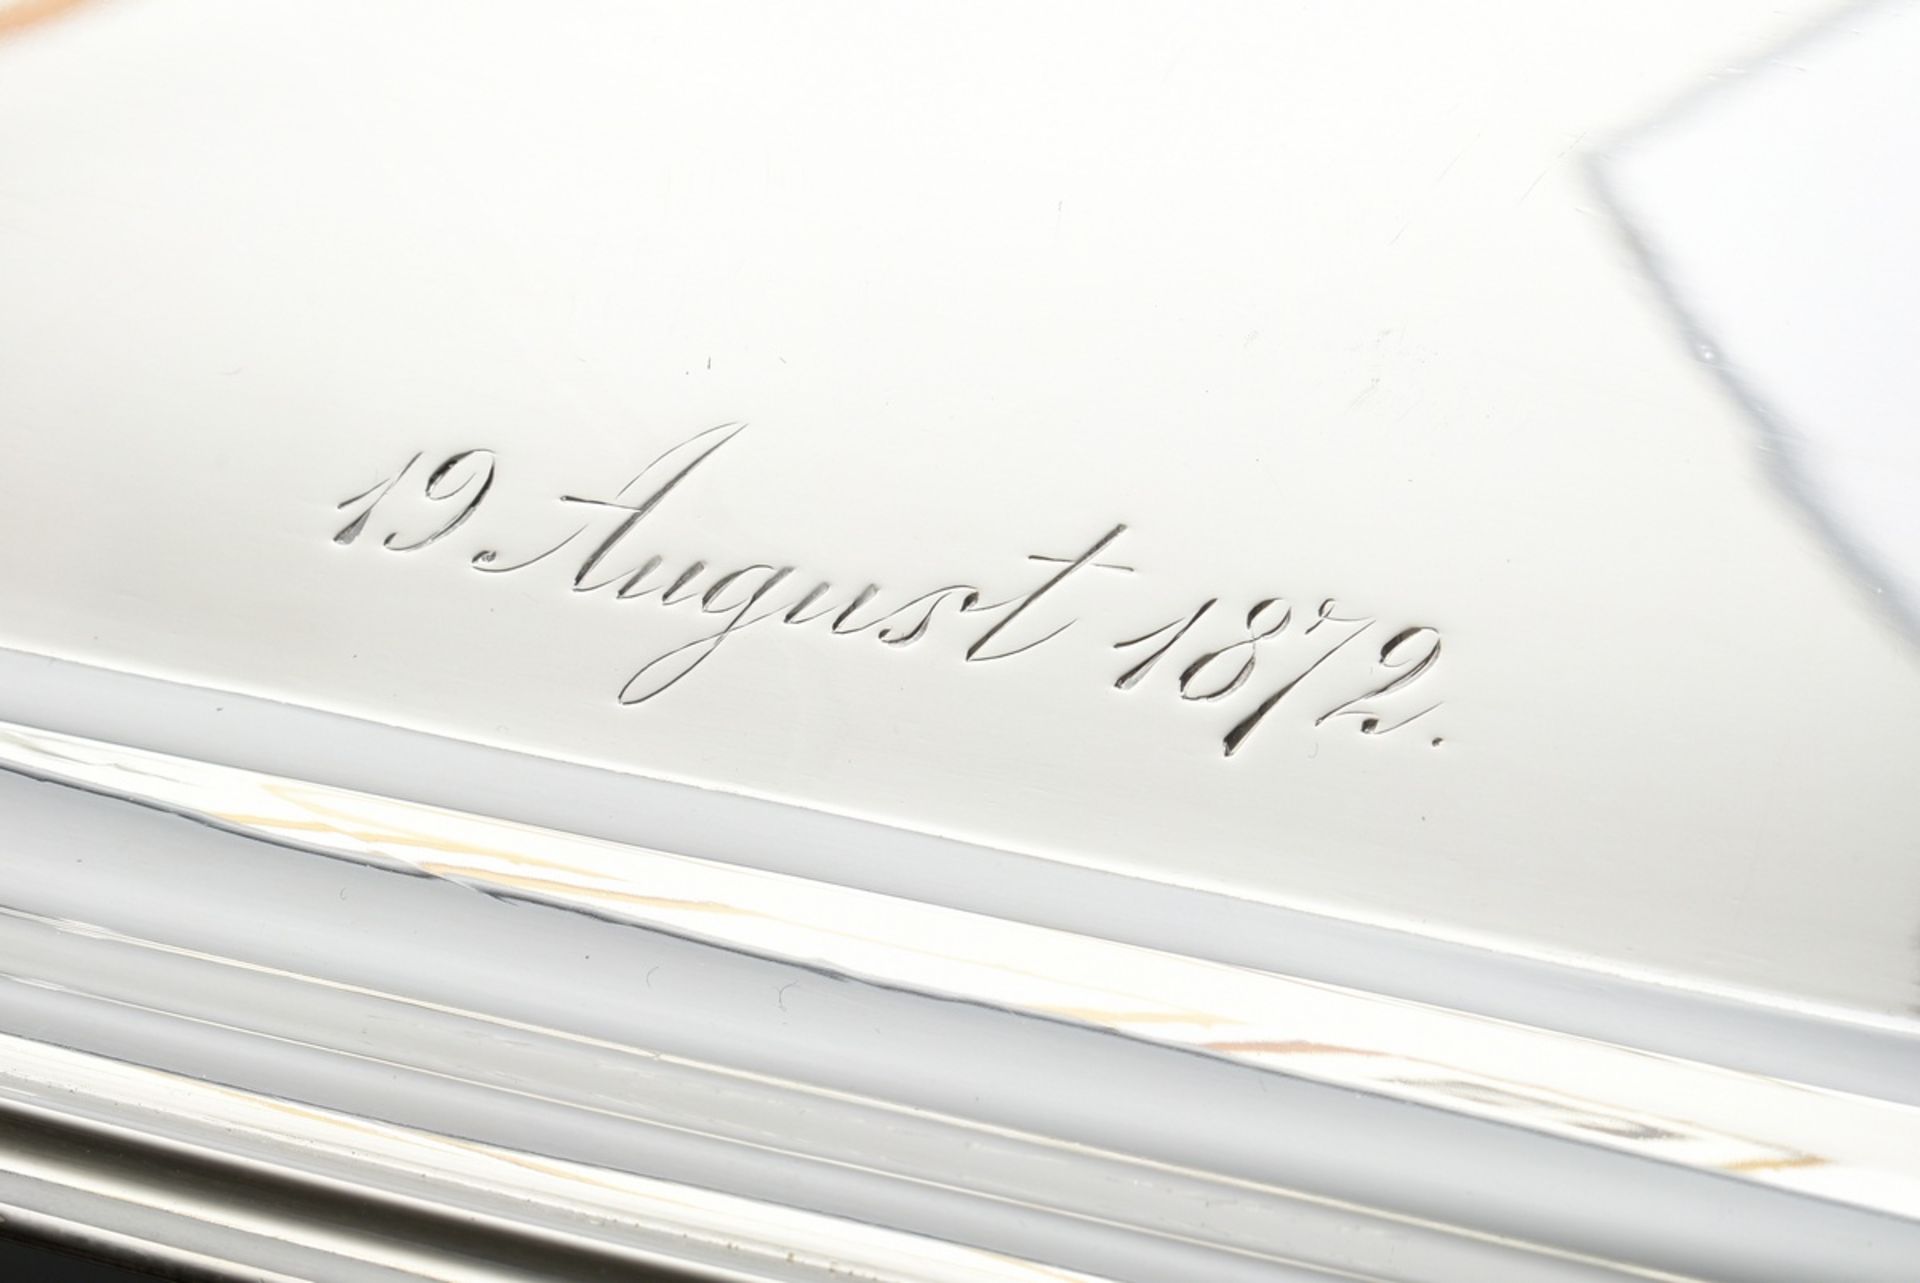 Rectangular tray in a simple design with side handles and monogram in Fraktur script ‘JR’ and date  - Image 3 of 6